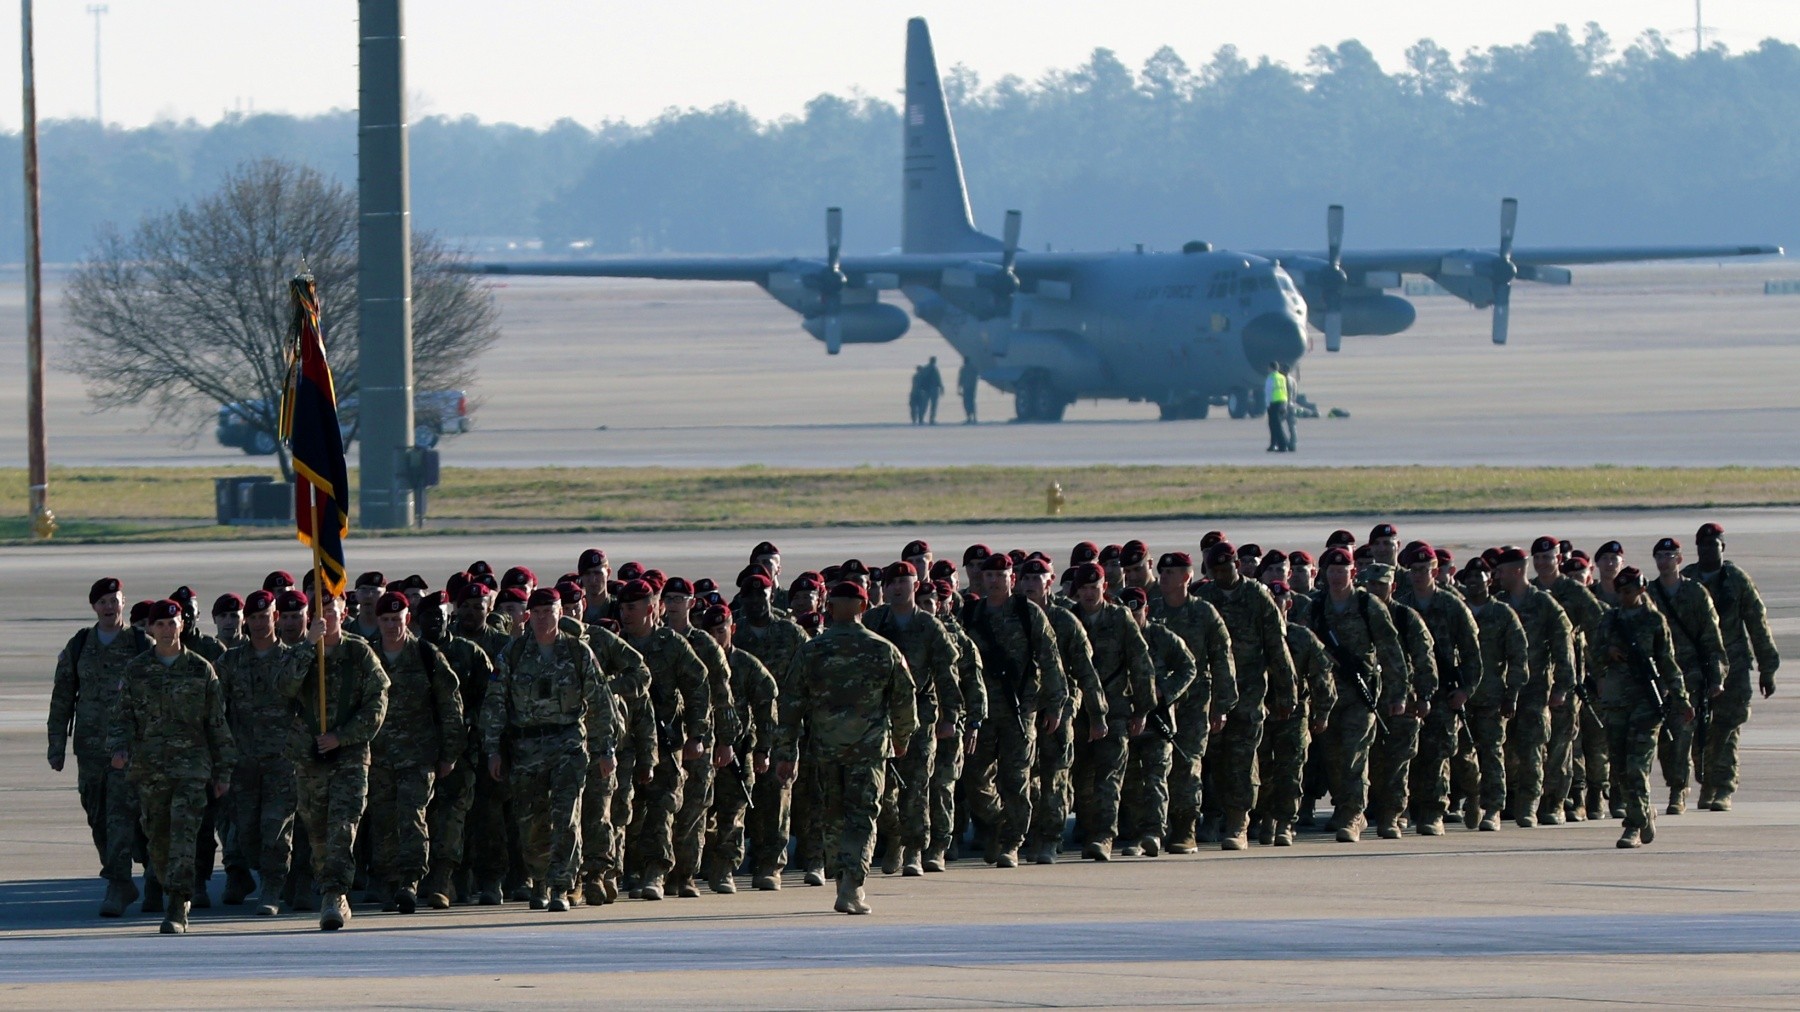 82nd Airborne Division paratroopers redeploy Article The United